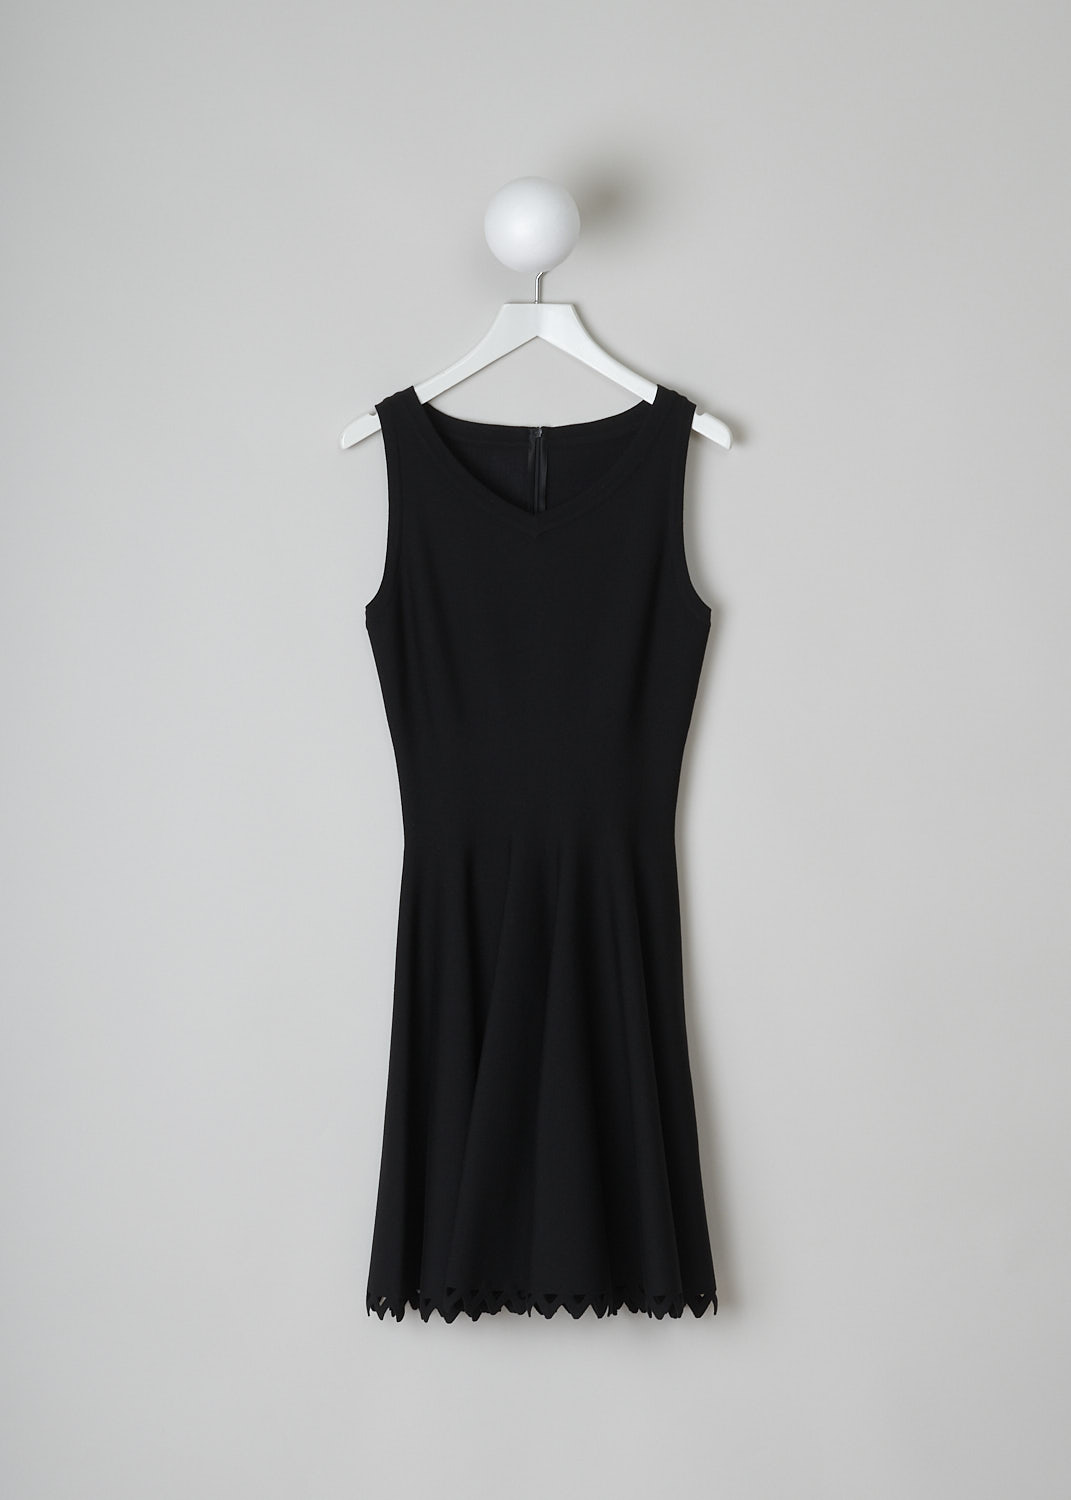 ALAÏA, BLACK SLEEVELESS DRESS WITH CUT-OUT HEMLINE, 5W9RD81RM191_ROBE_SM_TRIGONE_LAINE, Black, Front, This sleeveless fit-and-flare dress has a V-neckline. The dress has a flared skirt with a serrated cut-out hemline. In the back, a concealed centre zip functions as the closure option.
